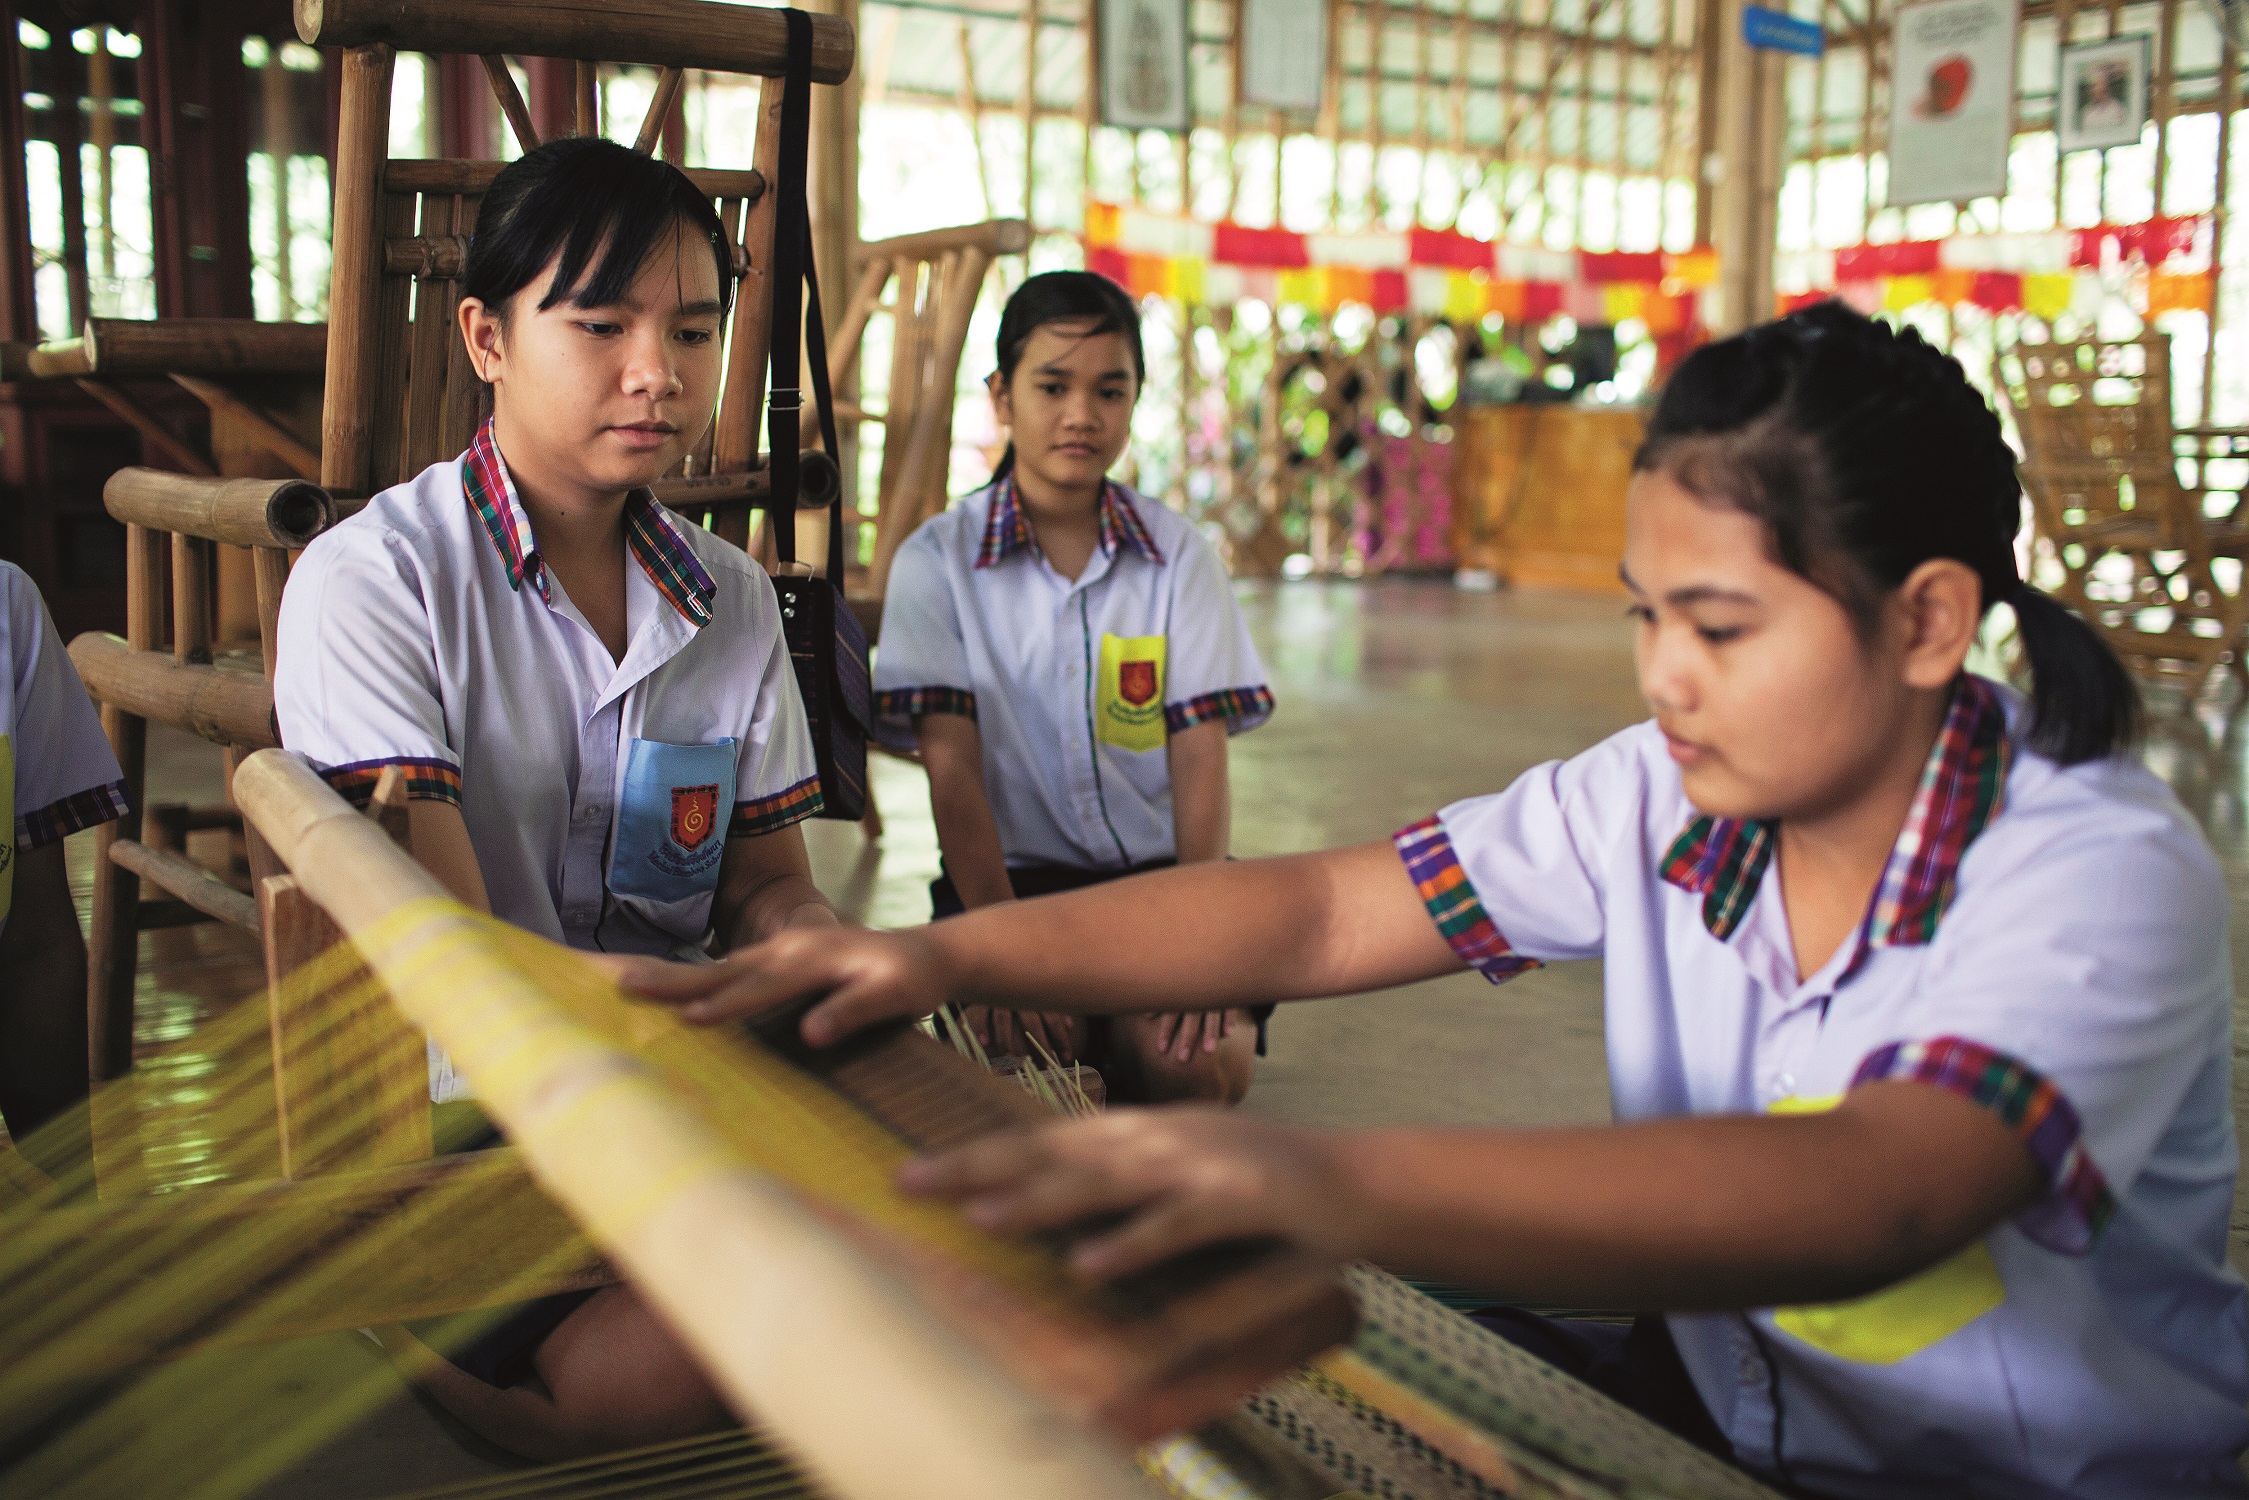 Students weave a silk product at the Bamboo School, in Lam Plai Mat district, Thailand, November 7, 2013. Photo by Will Baxter/for The Wall Street Journal